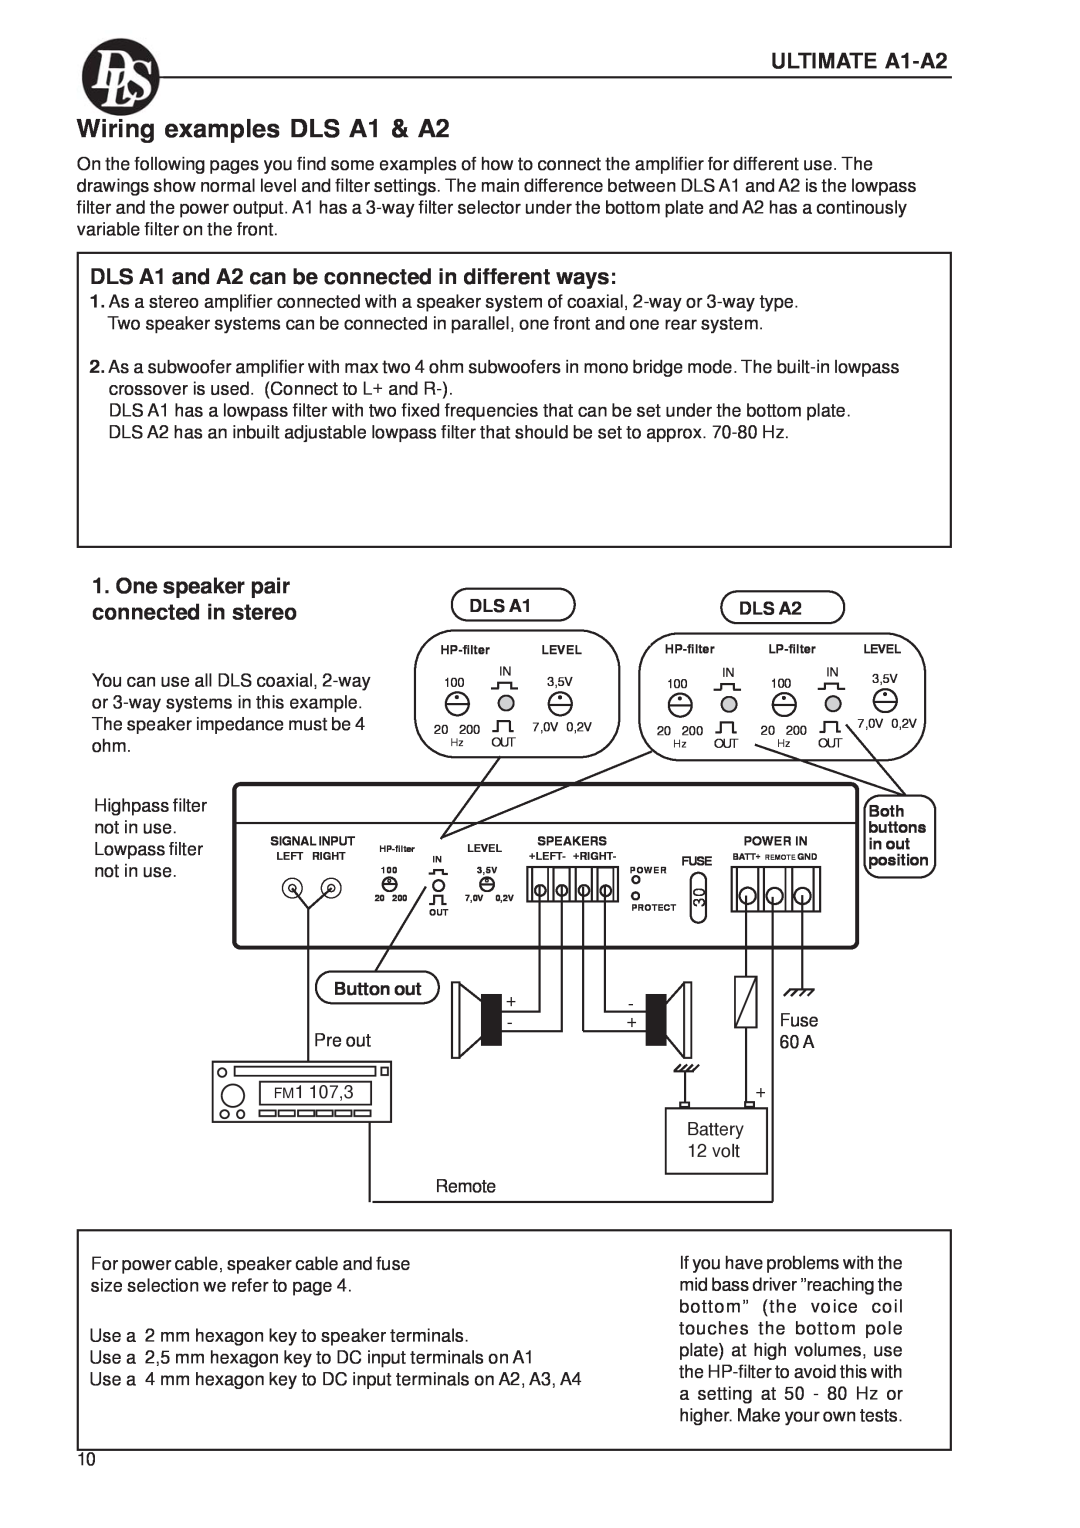 DLS Svenska AB Wiring examples DLS A1 & A2, ULTIMATE A1-A2, DLS A1 and A2 can be connected in different ways, DLS A2 